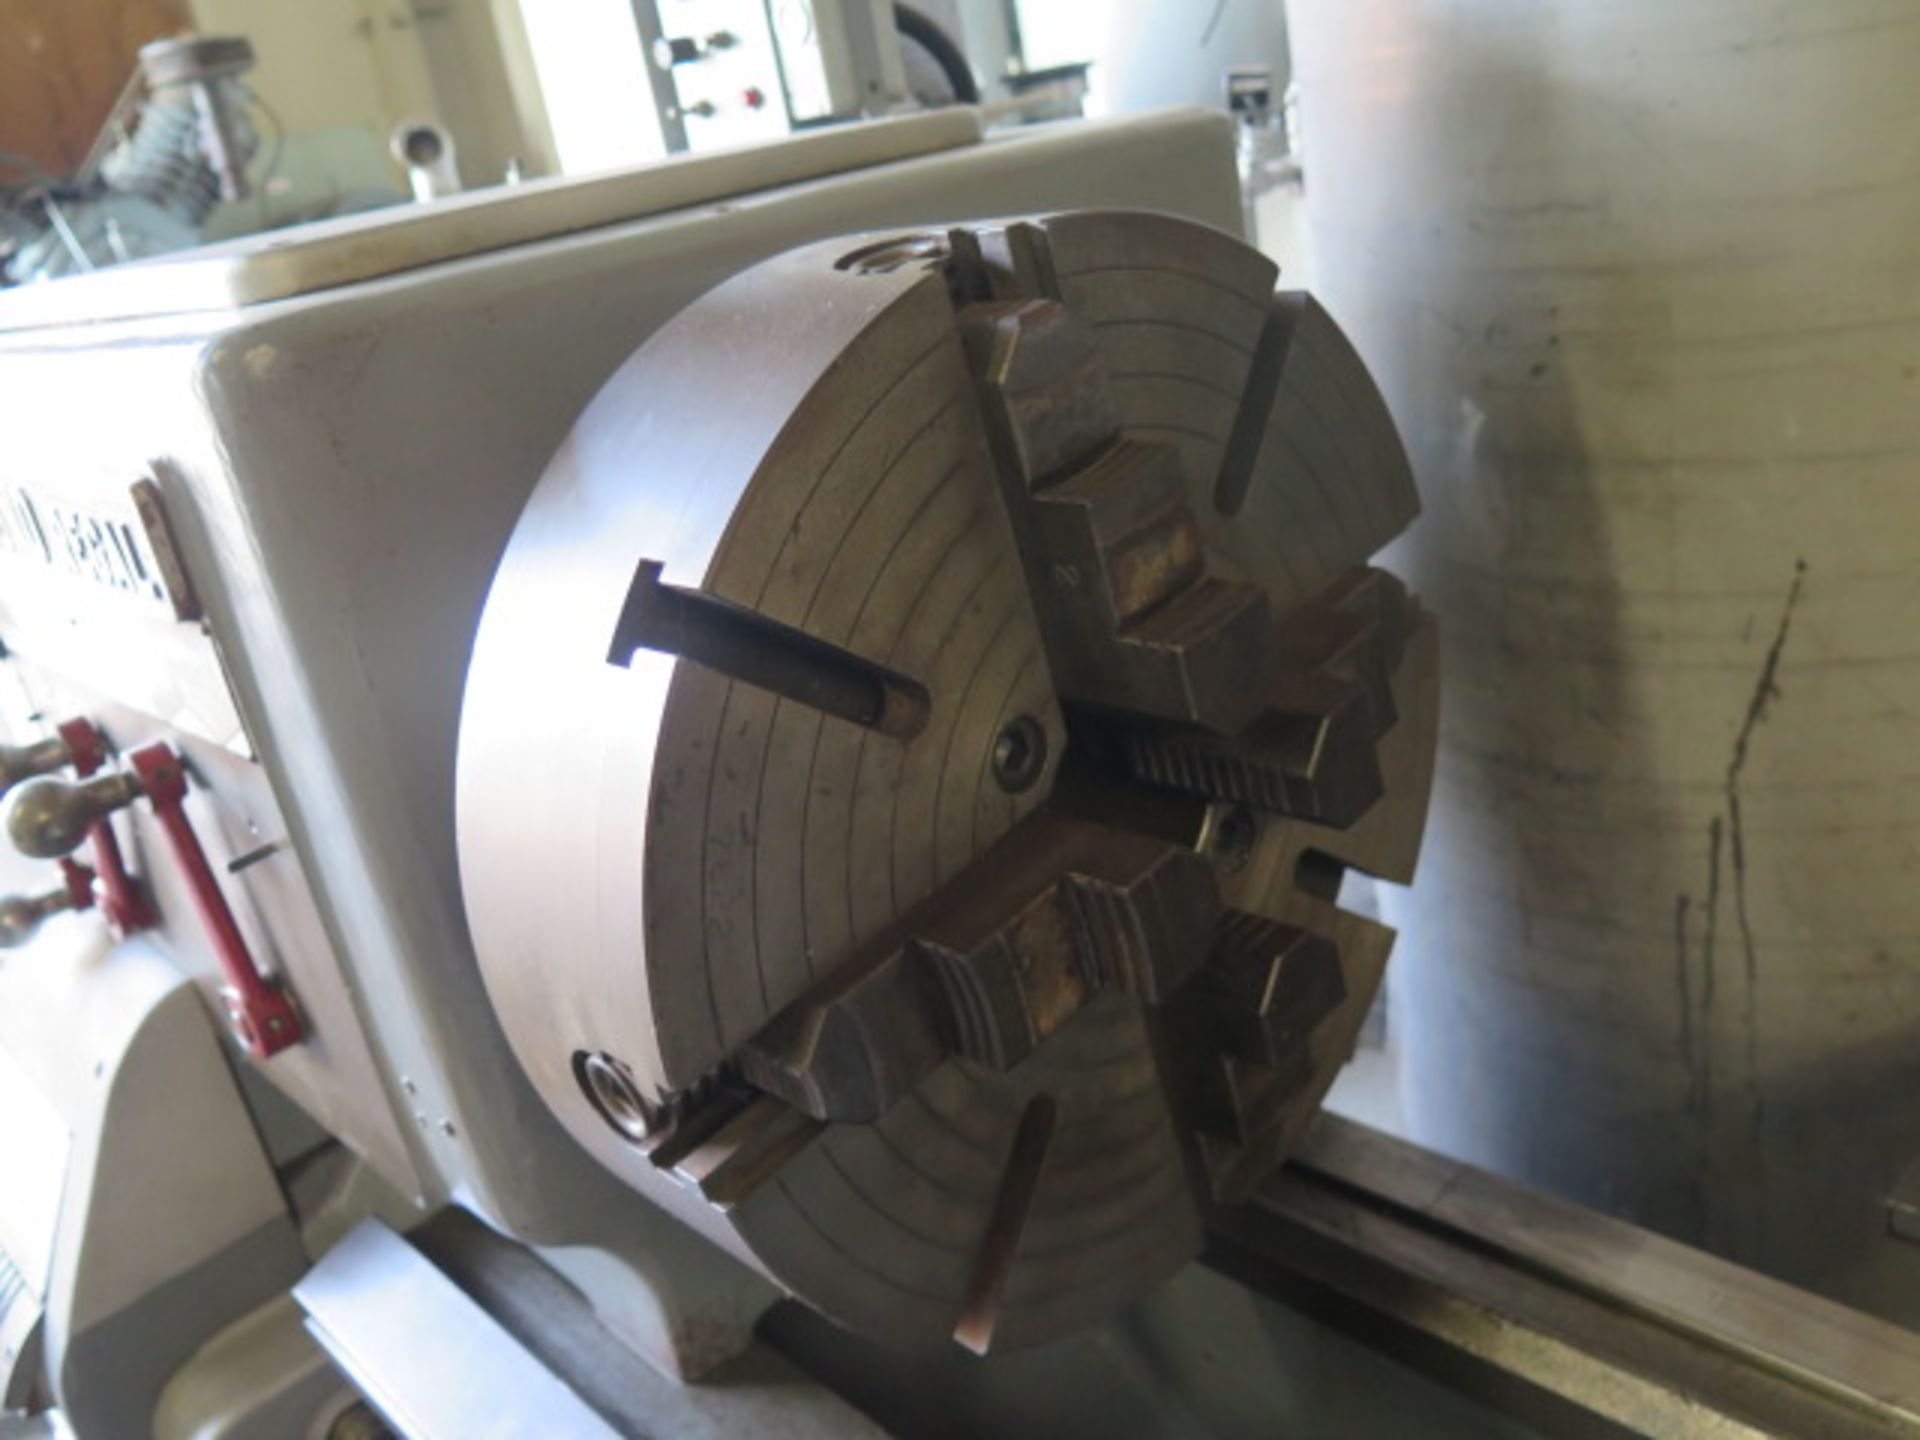 LeBlond Regal 19” x 56” Lathe s/n 2E72 w/ 38-1500 RPM, Inch Threading, Taper Attachment, SOLD AS IS - Image 6 of 12